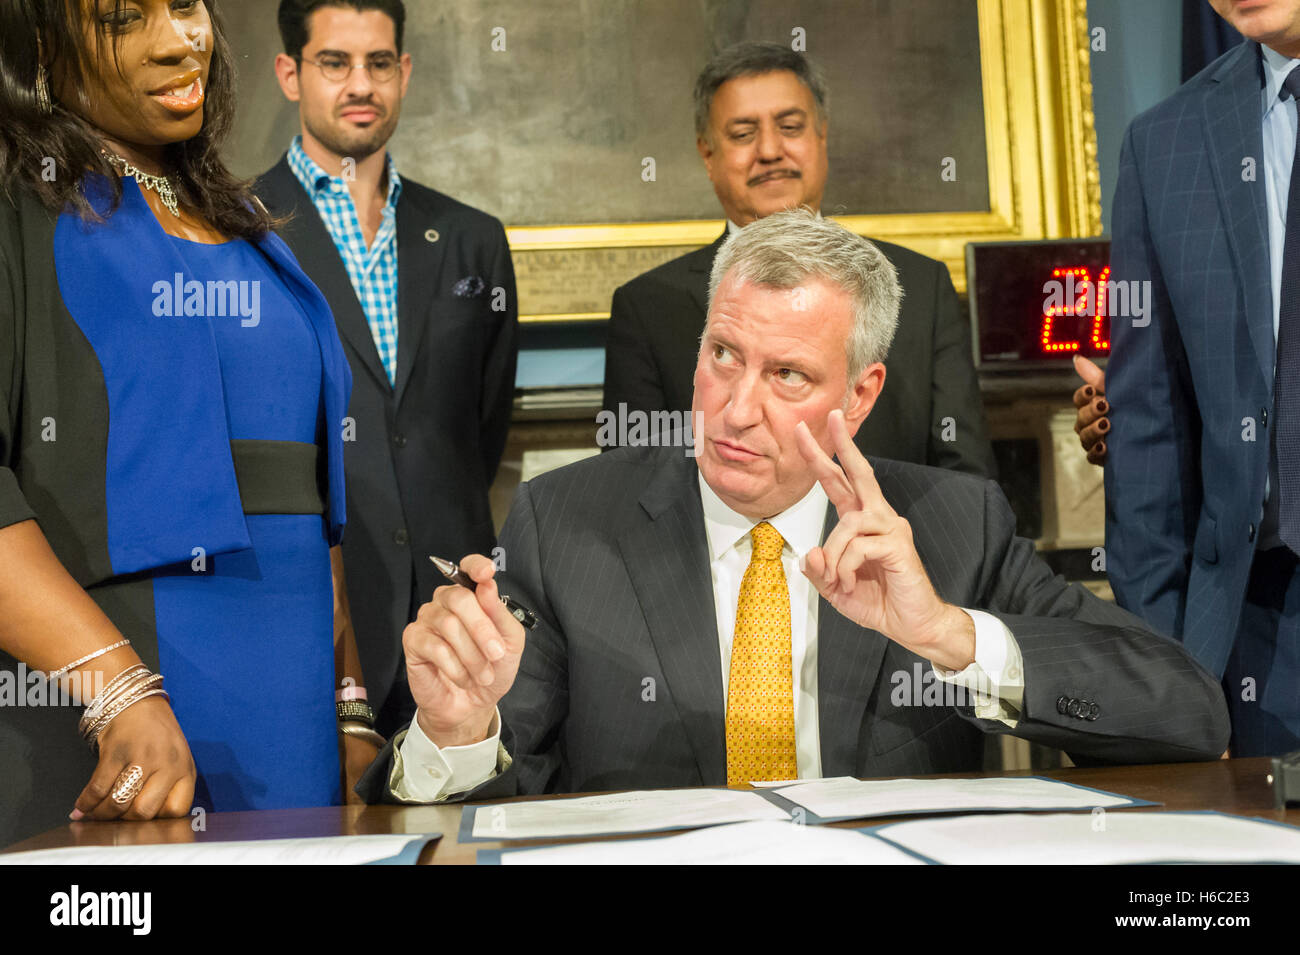 New York Mayor Bill de Blasio, center, at a bill signing related to increasing reporting and transparency around programs and services for inmates in the Blue Room in New York City Hall, on Tuesday, October 18, 2016 in New York. (© Frances M. Roberts) Stock Photo